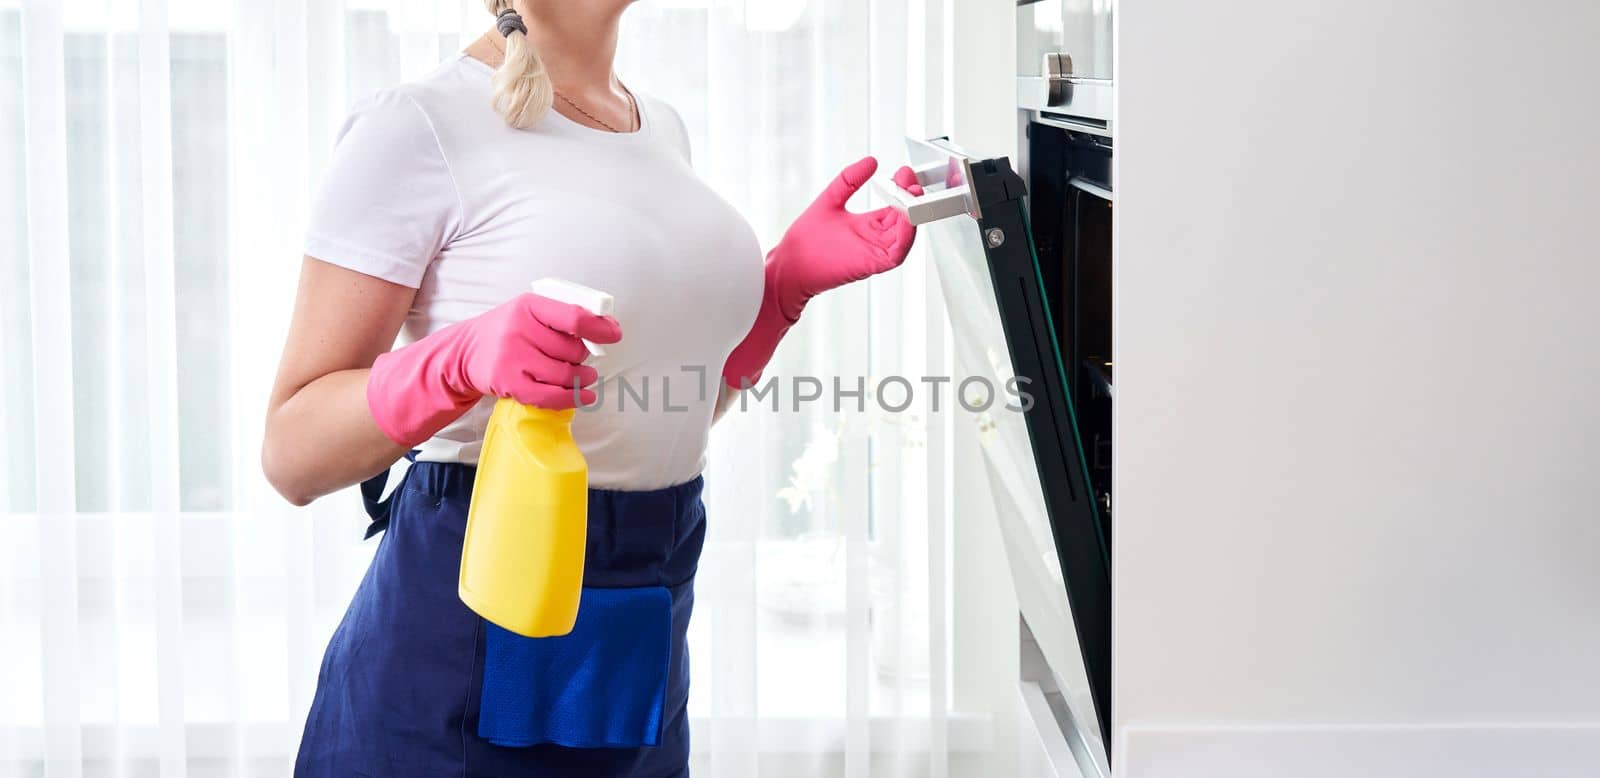 Young woman wearing gloves cleaning oven in the kitchen. Cleaning service concept by Mariakray